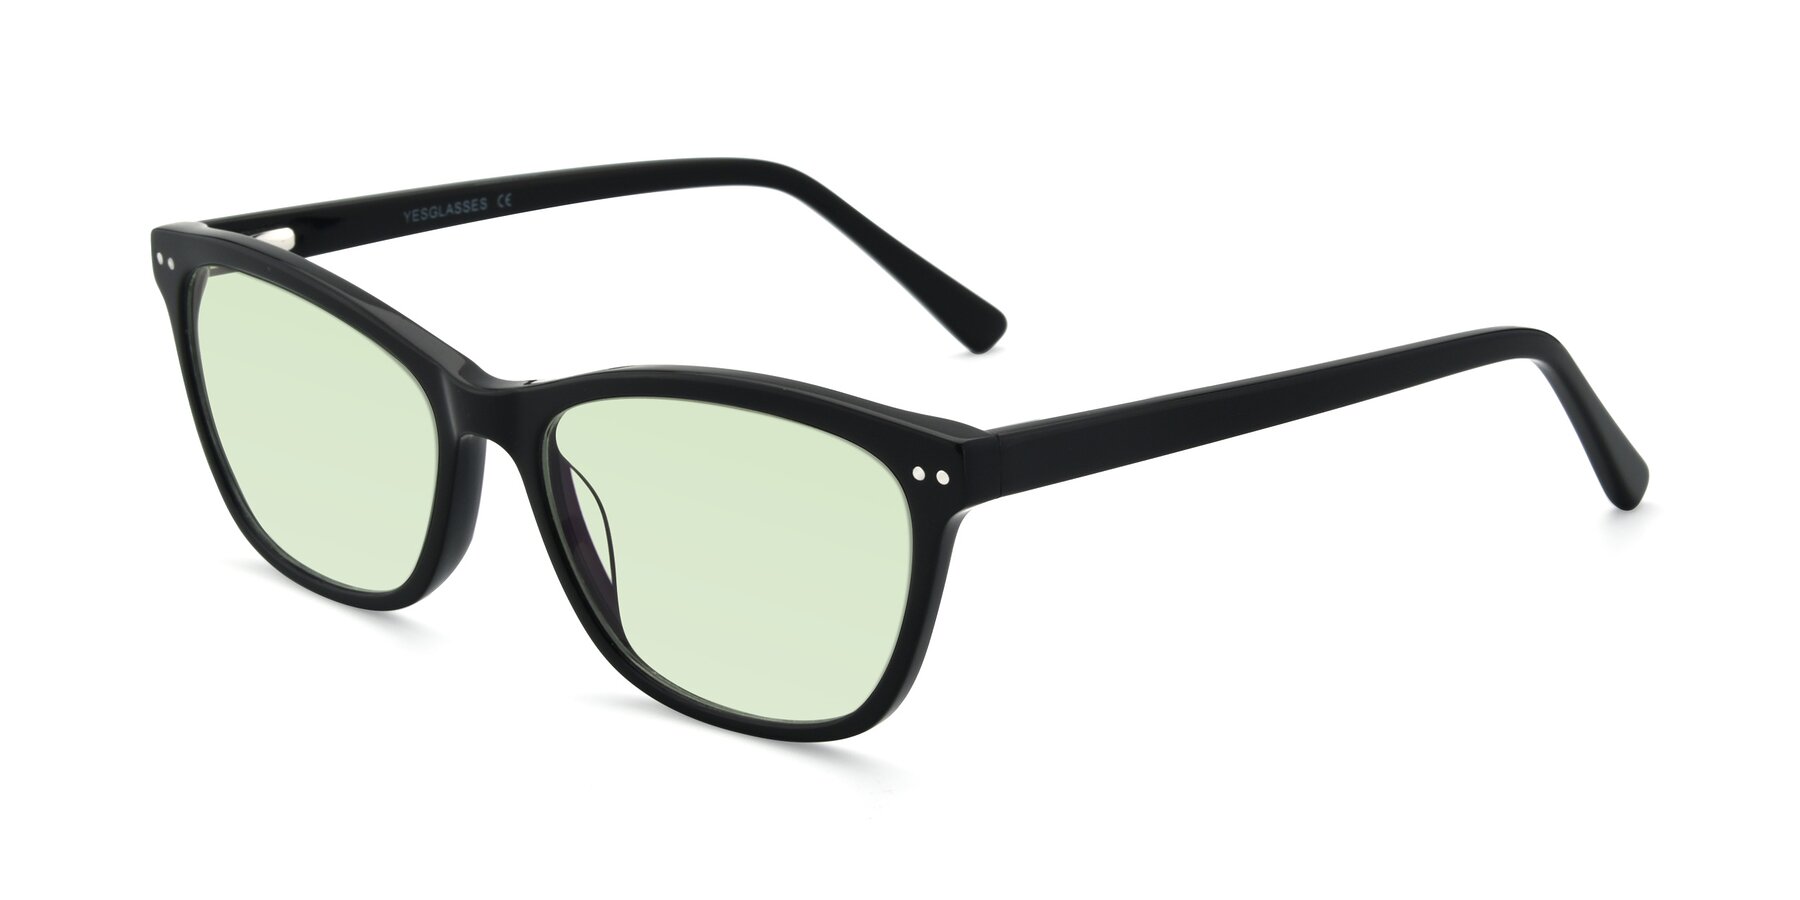 Angle of 17350 in Black with Light Green Tinted Lenses